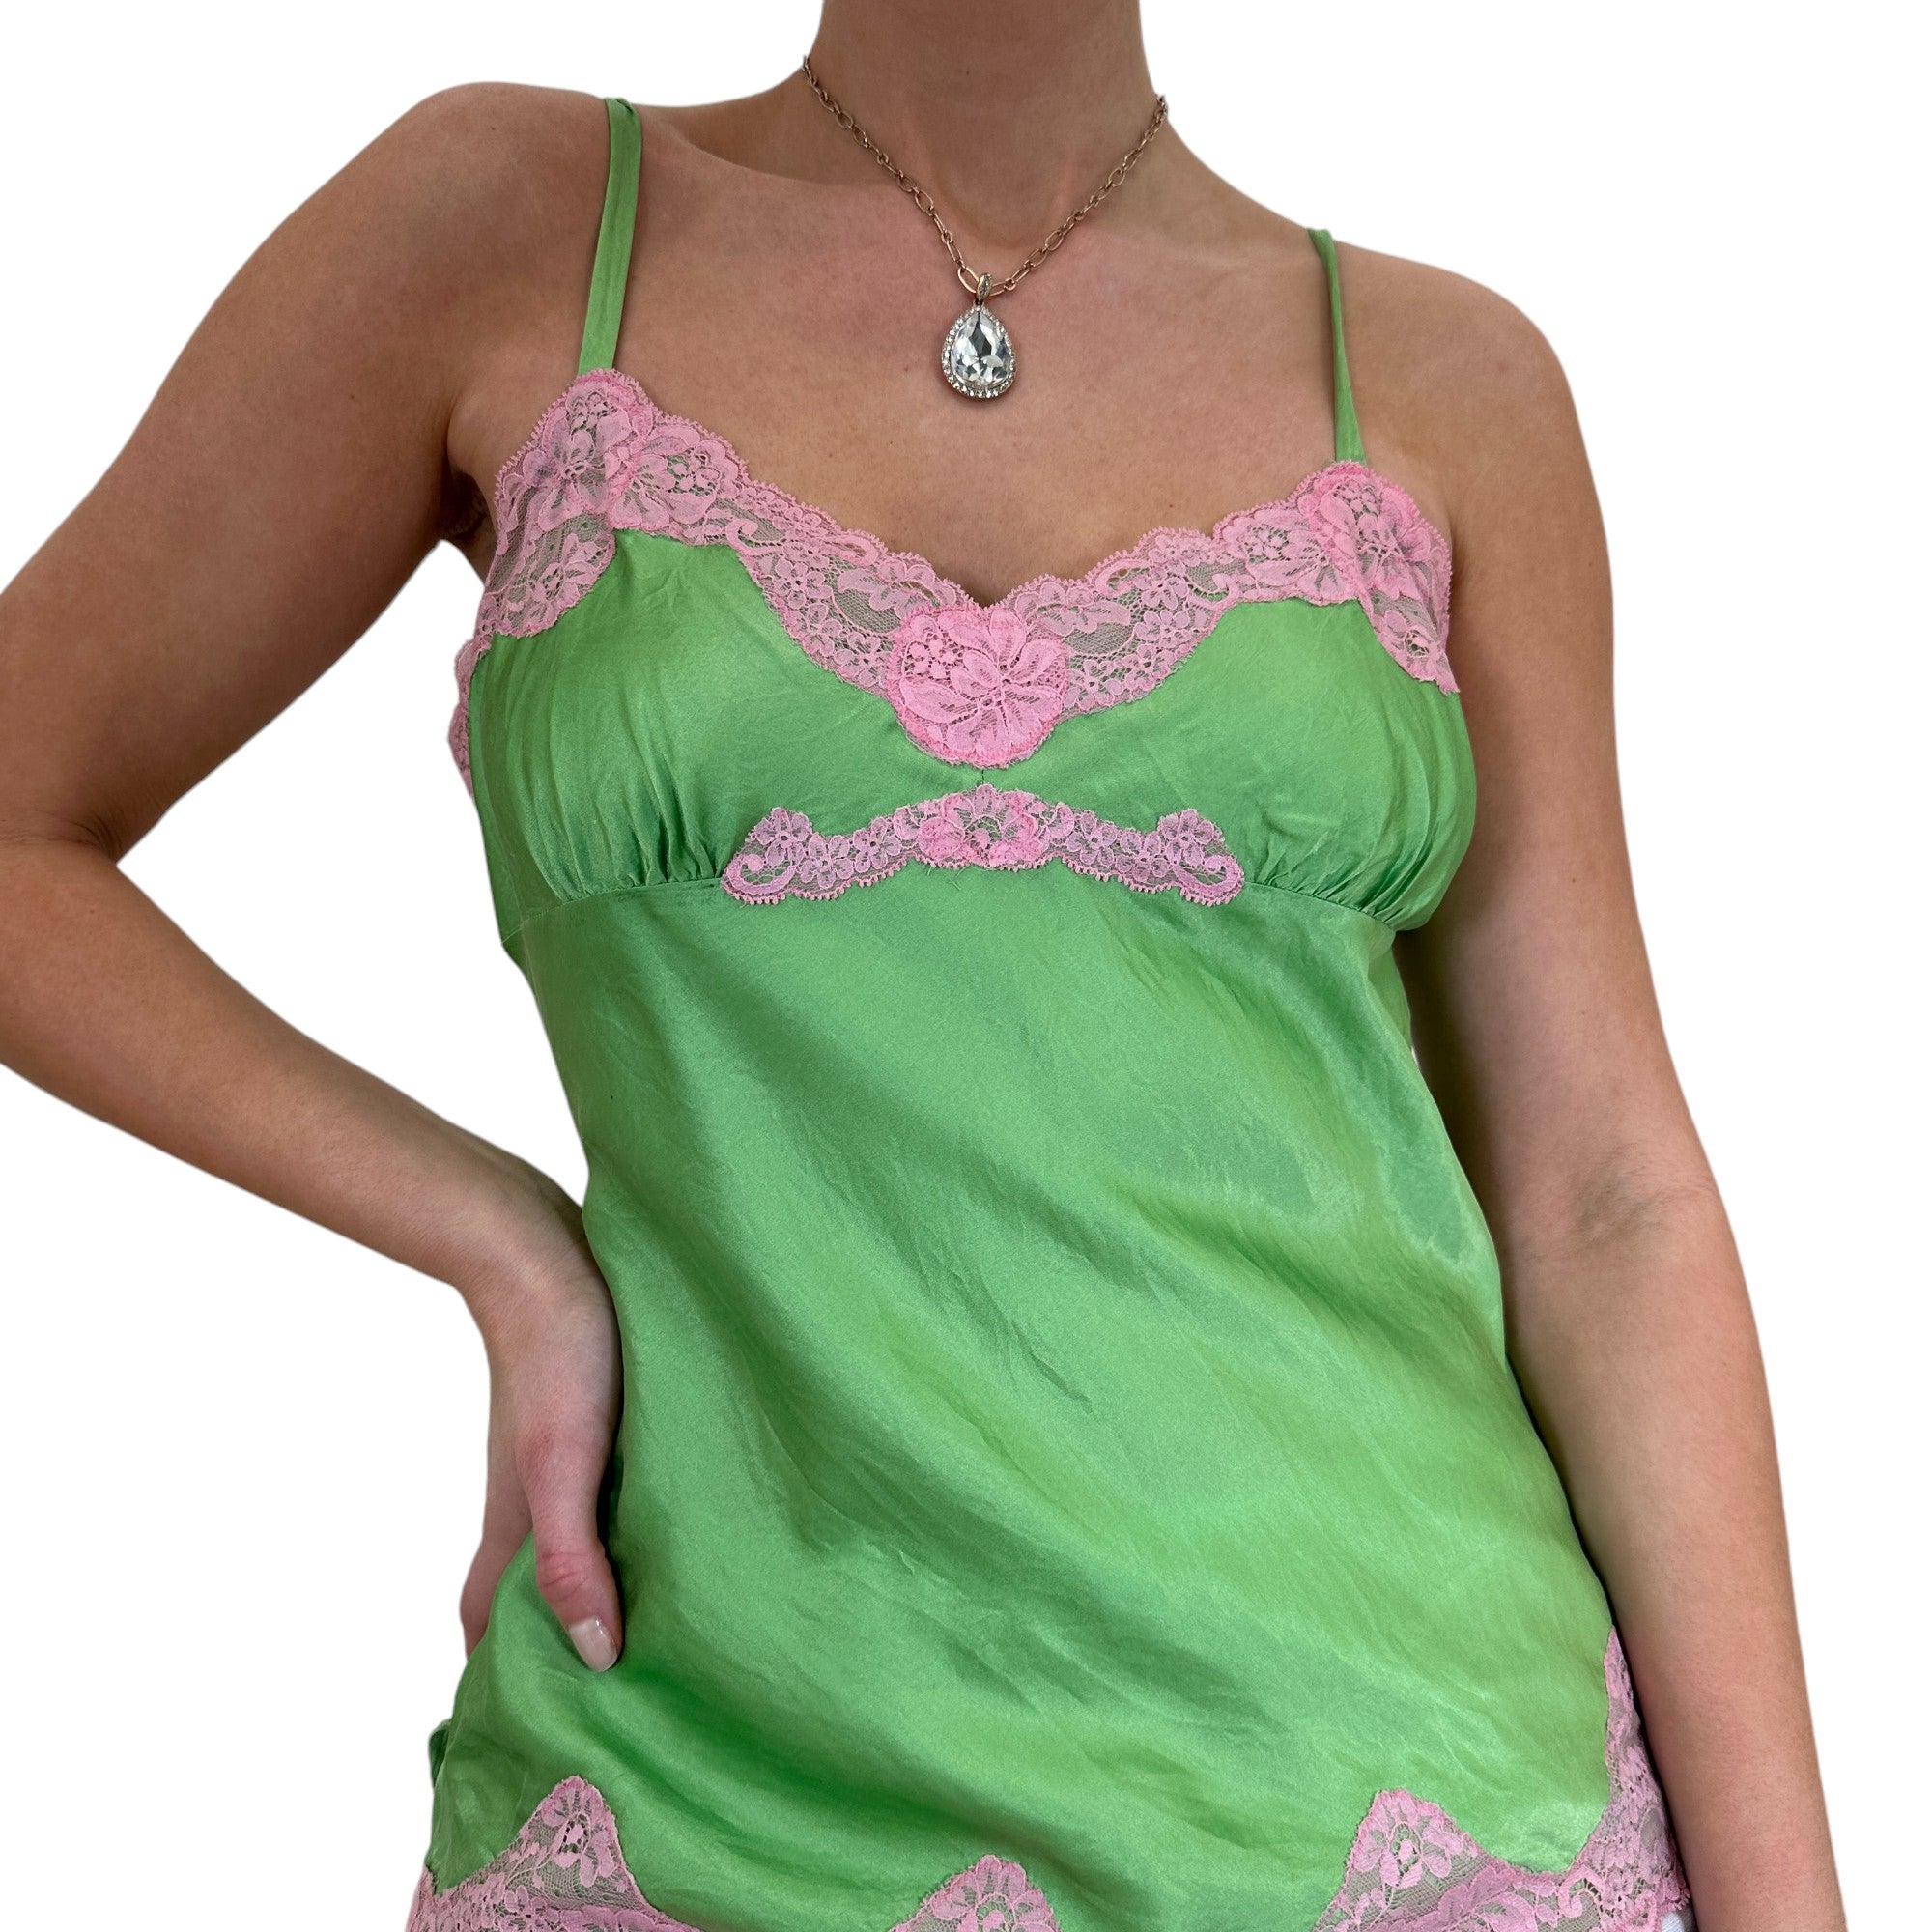 90s Vintage Green + Pink Floral Lace Tank Top [M]